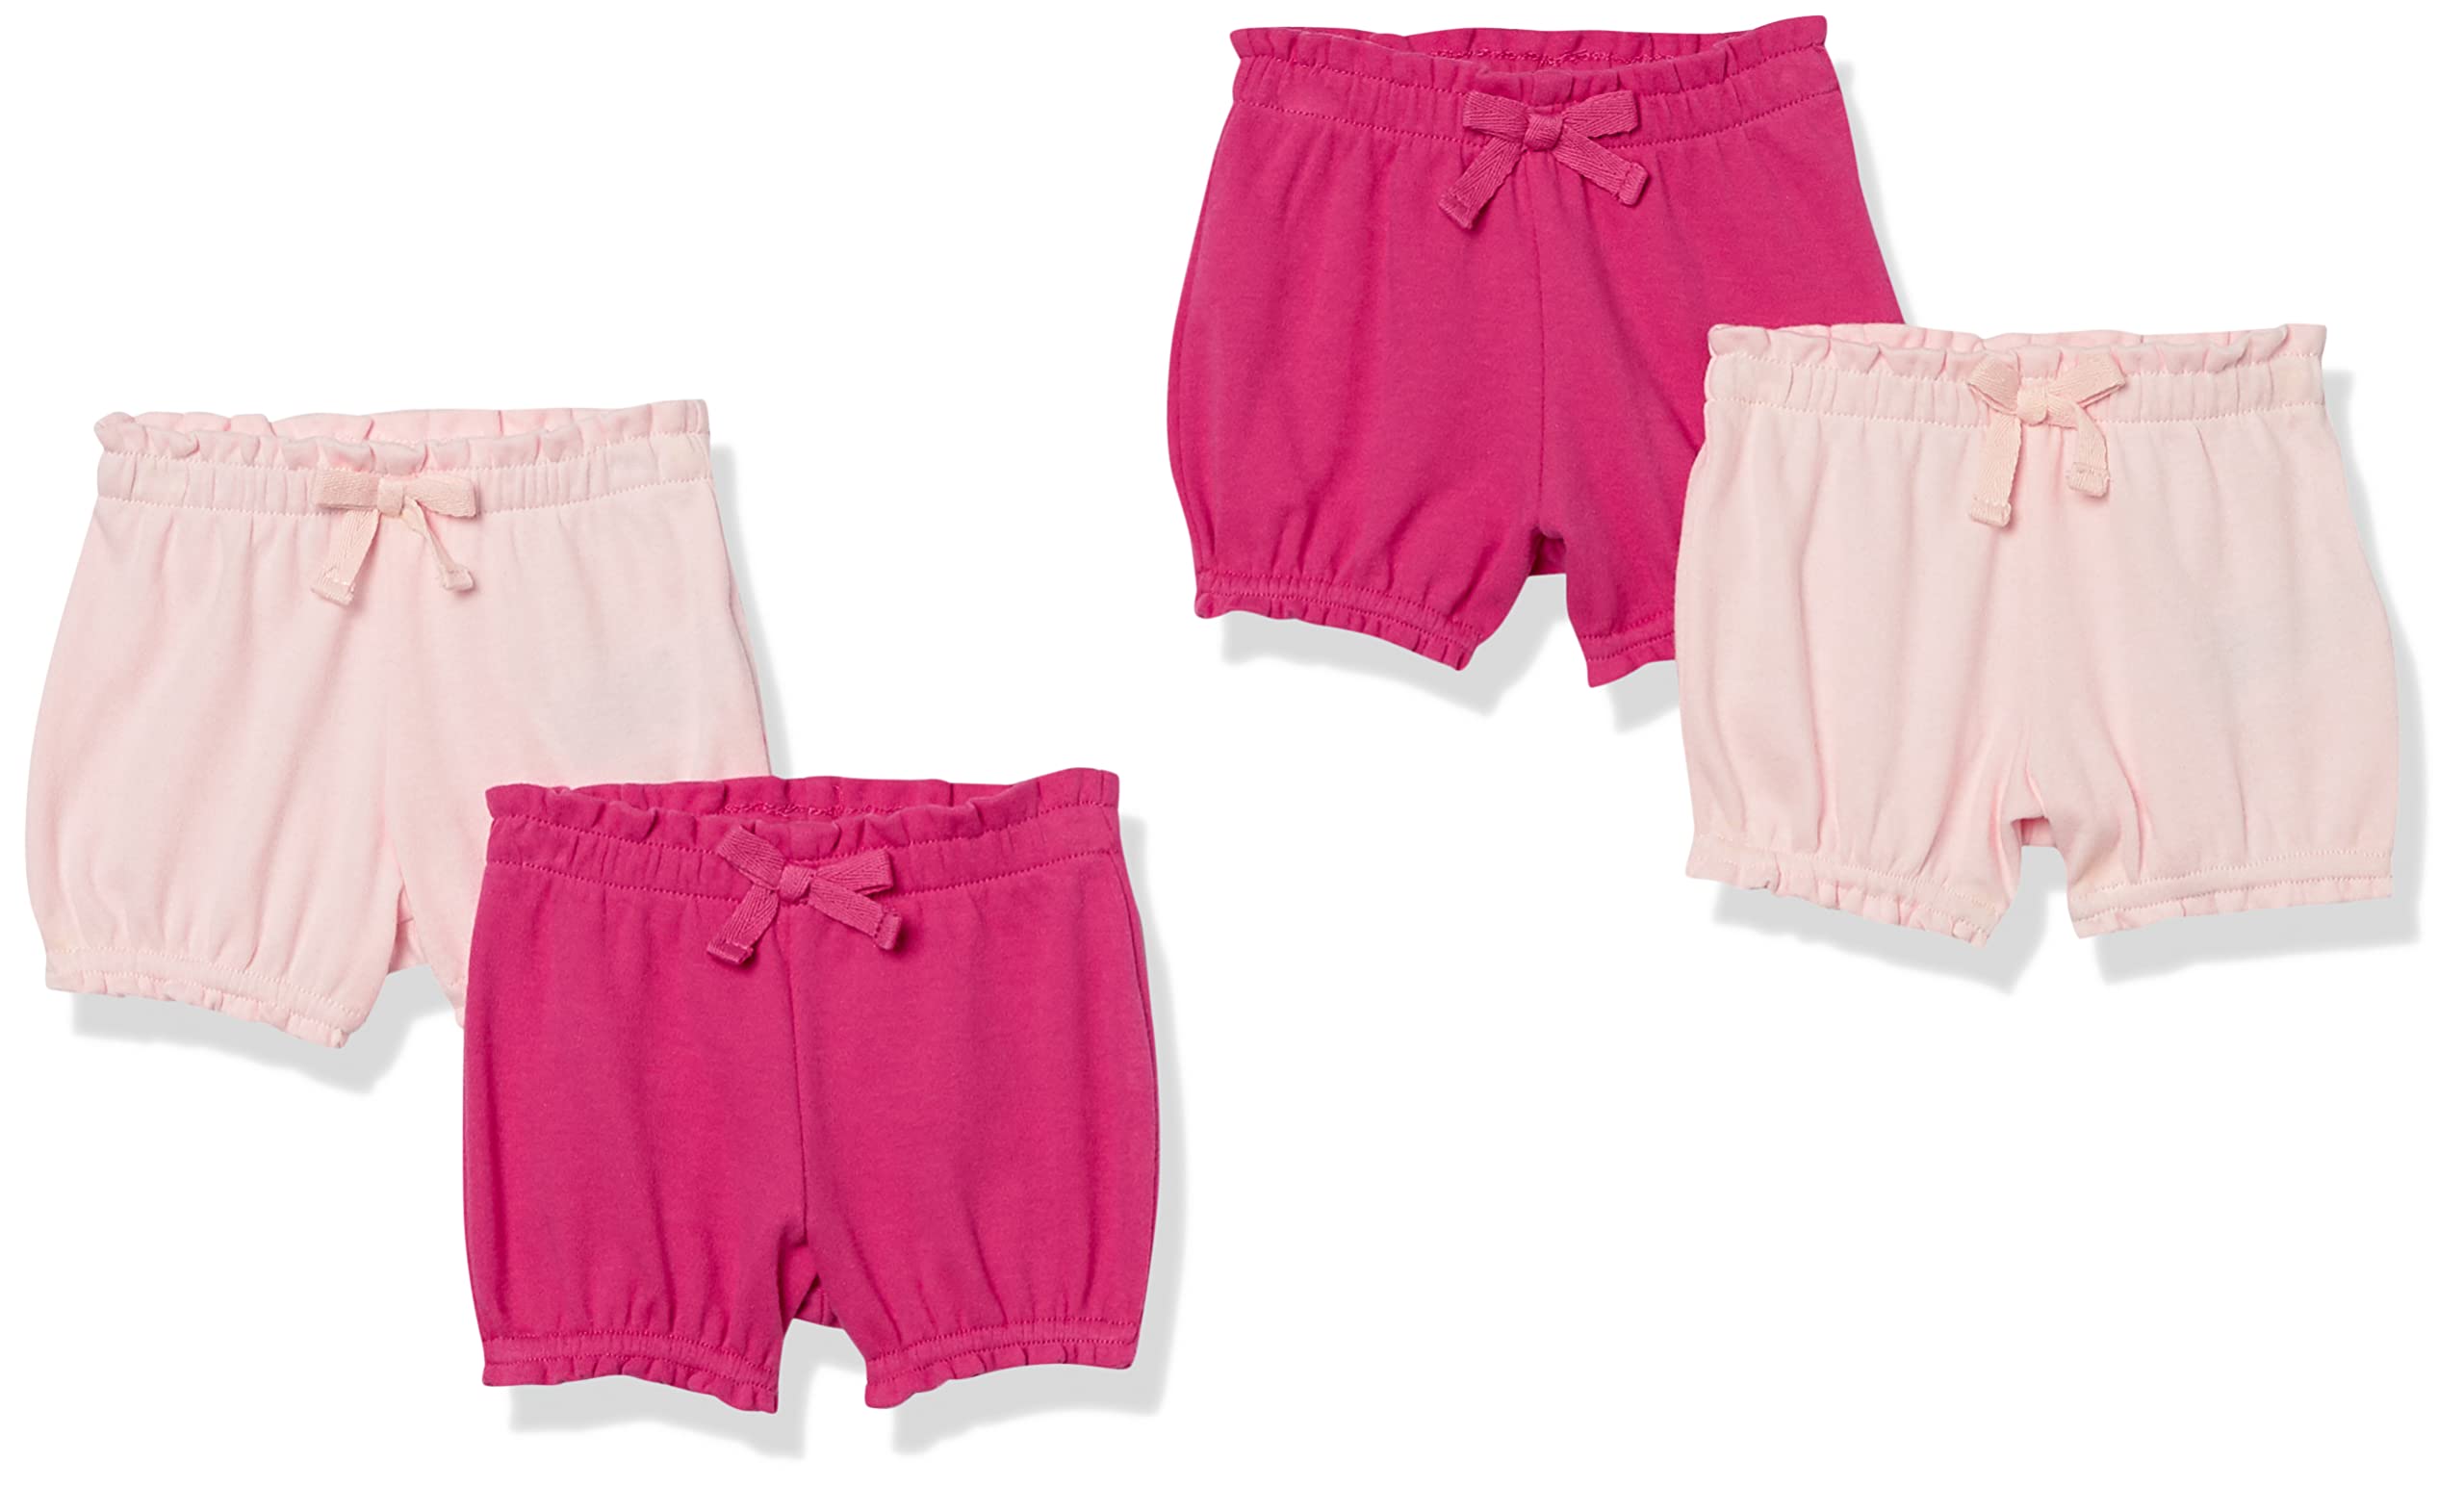 4-Count Amazon Essentials Baby Girls' 100% Cotton Bloomer Shorts (Various, Limited Sizes) $7.40 ($1.85 EA) + Free Shipping w/ Prime or on $35+